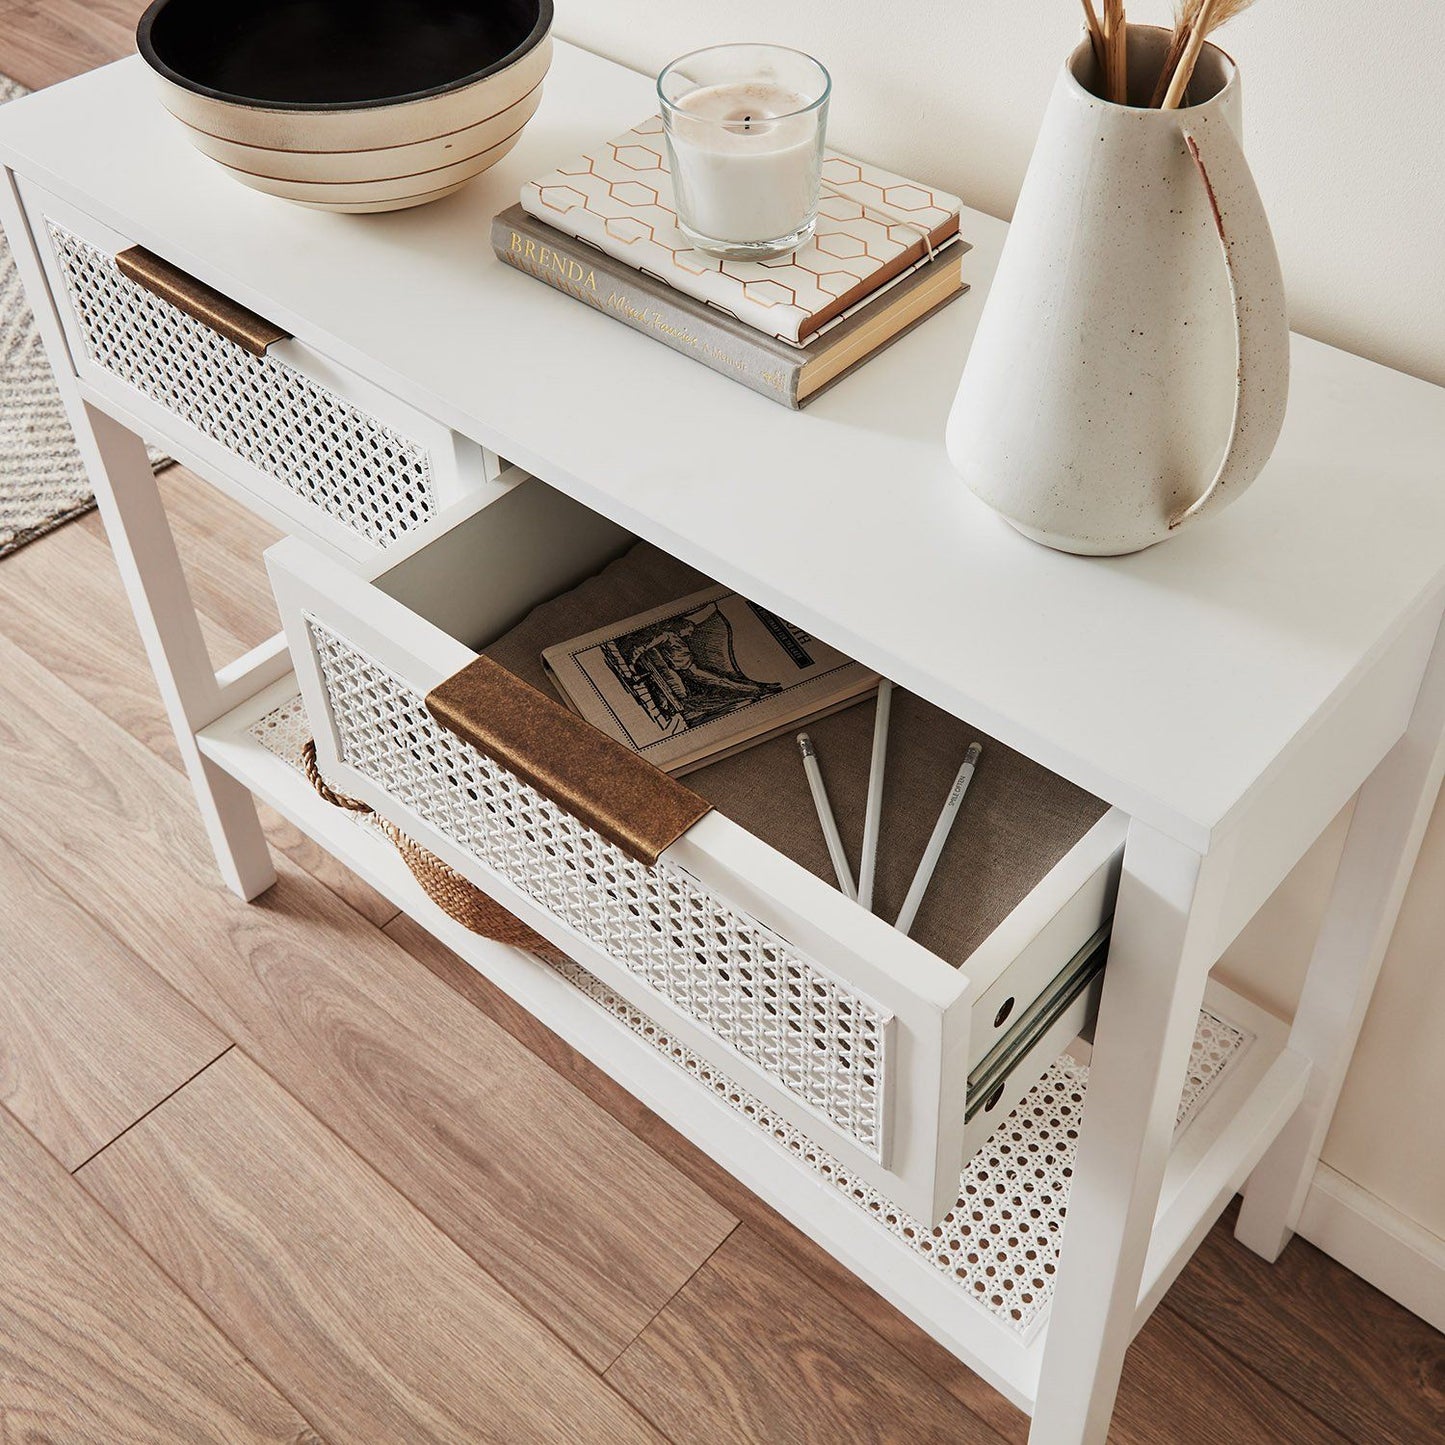 Charlie console table - cane front - white - Laura James